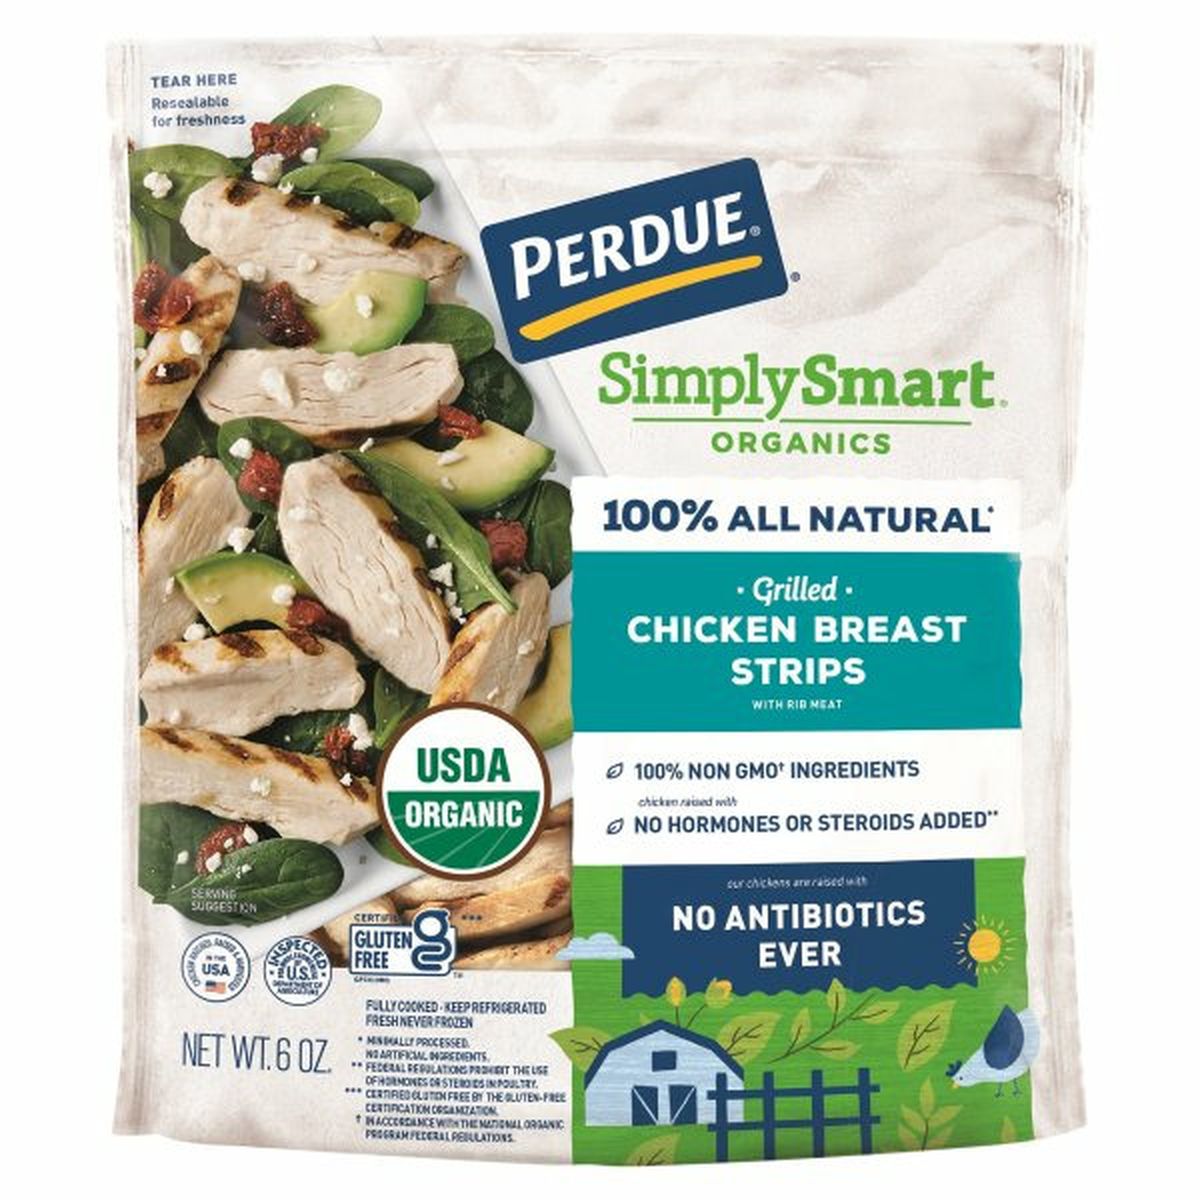 Calories in Perdue Simply Smart Chicken Breast Strips, With Rib Meat, Organic, Grilled